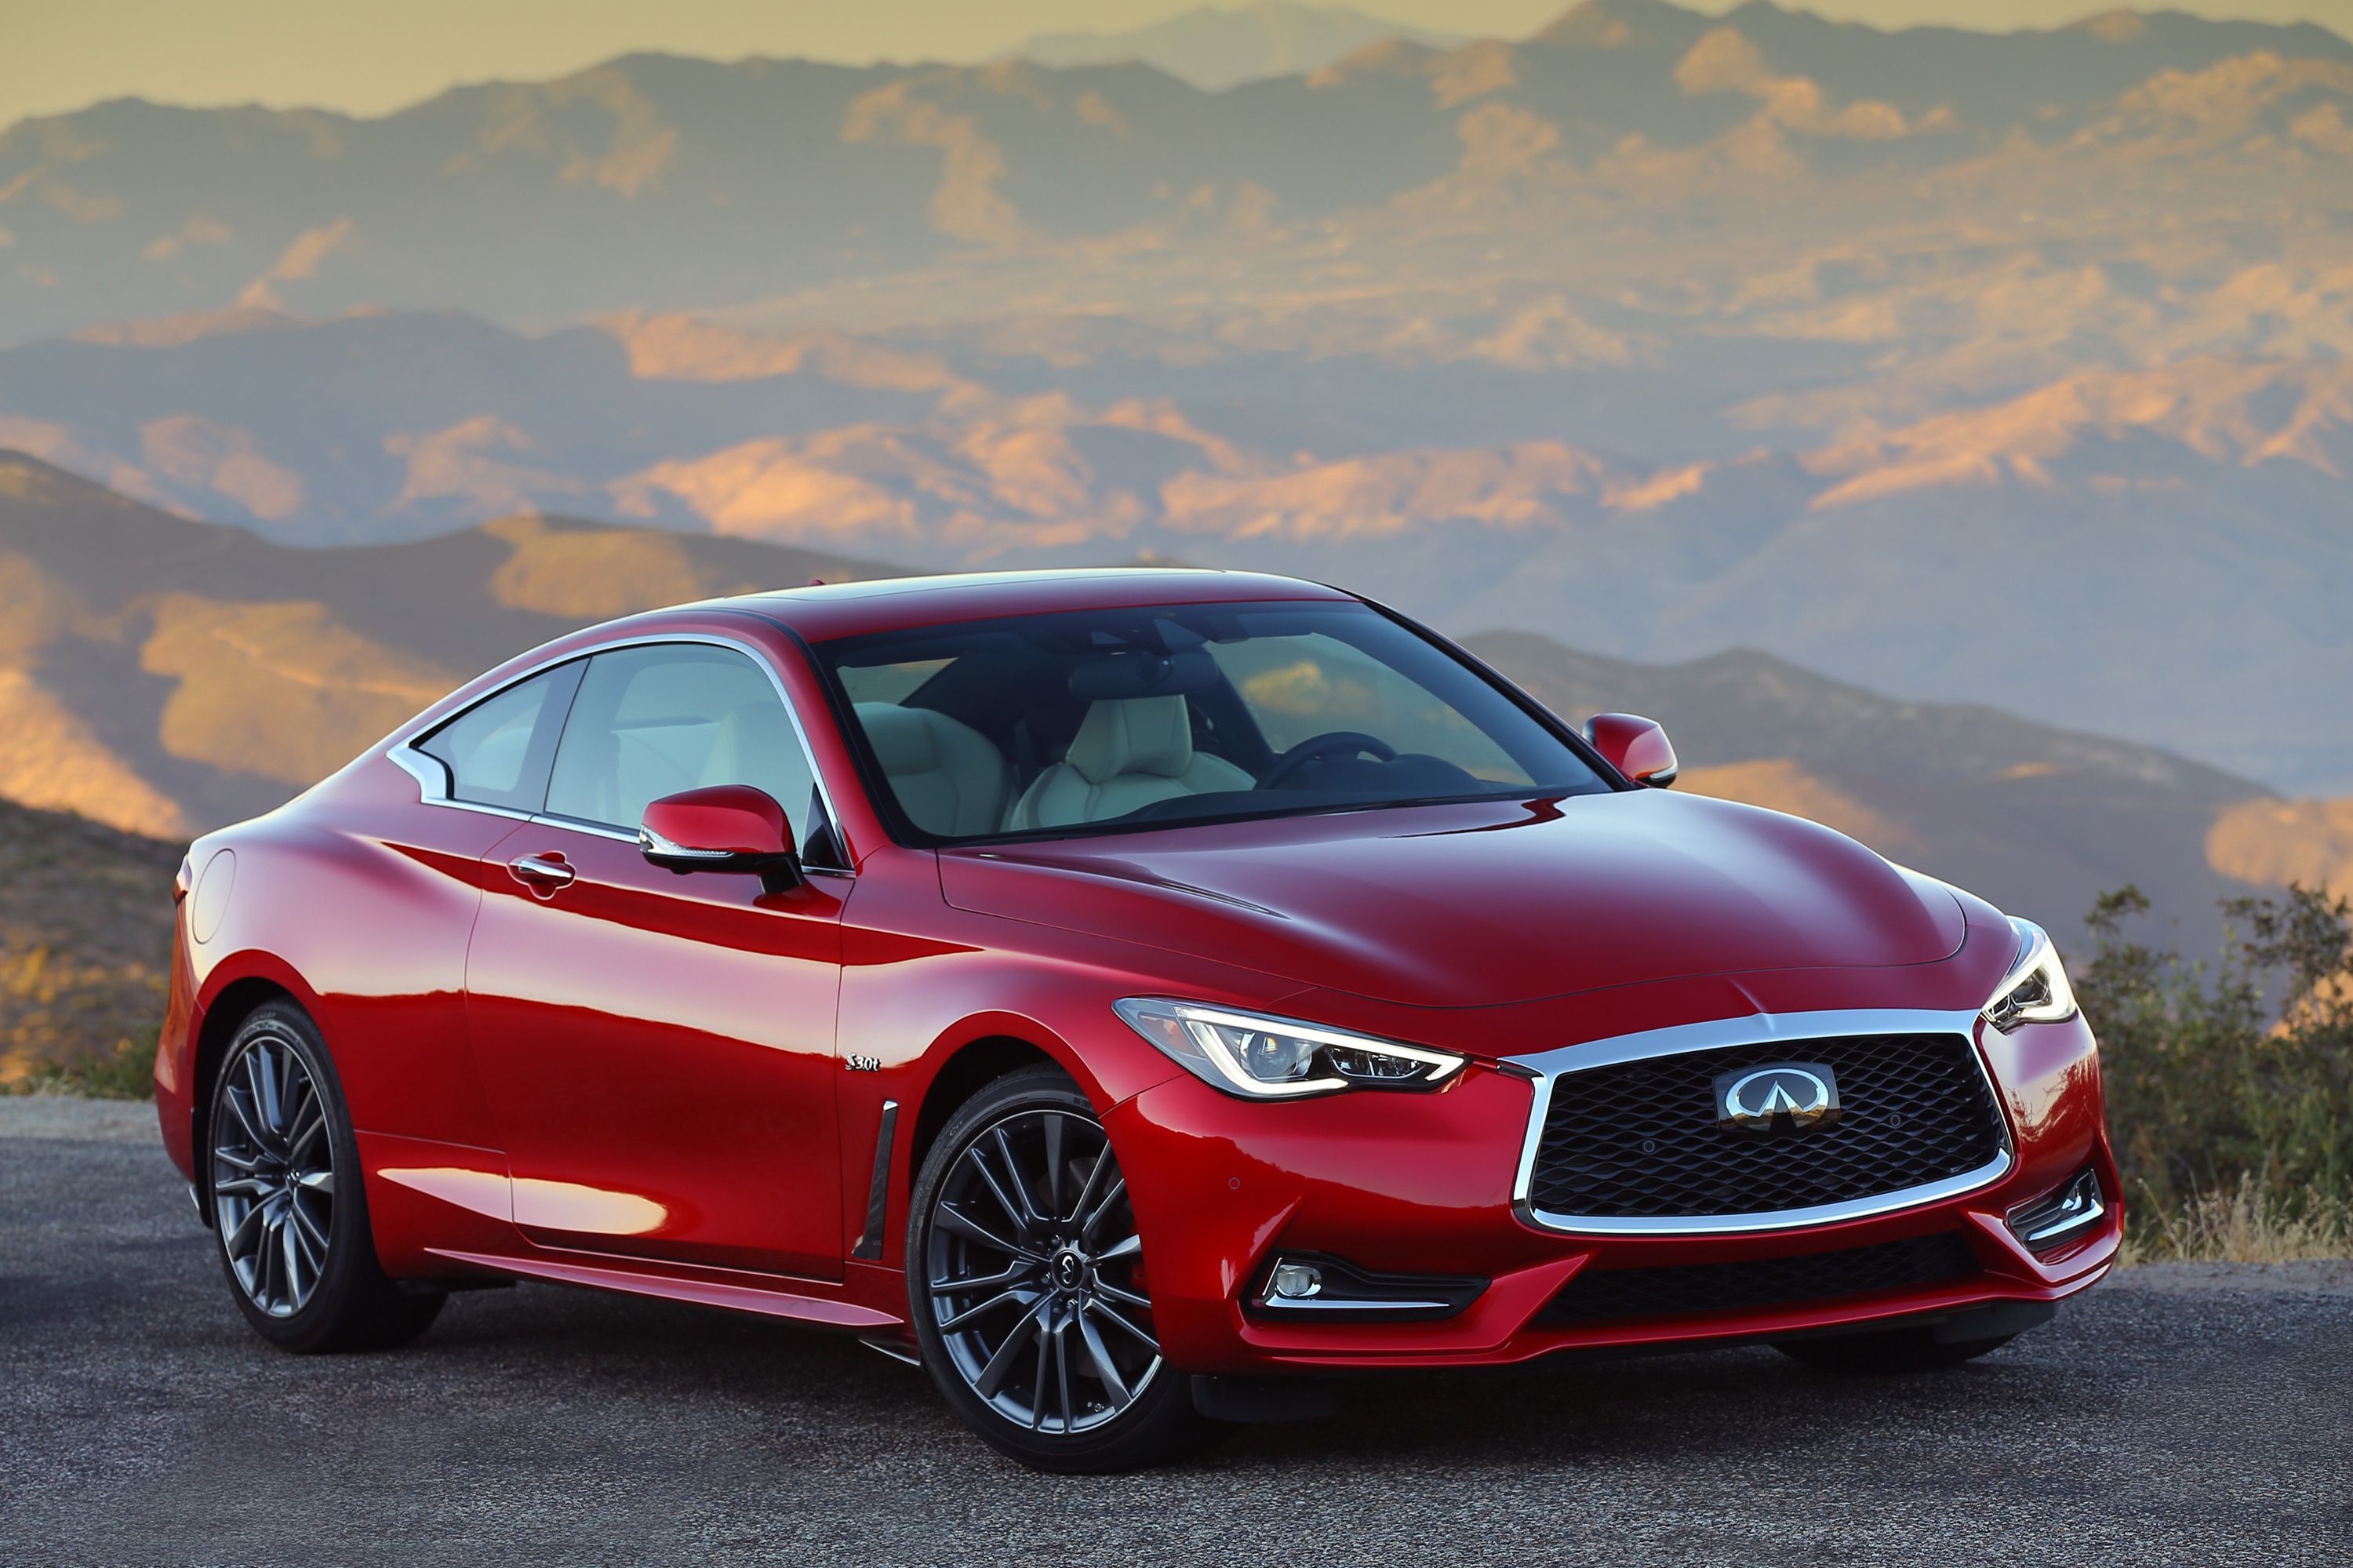 2021 Infiniti Q60 Review, Pricing, and Specs